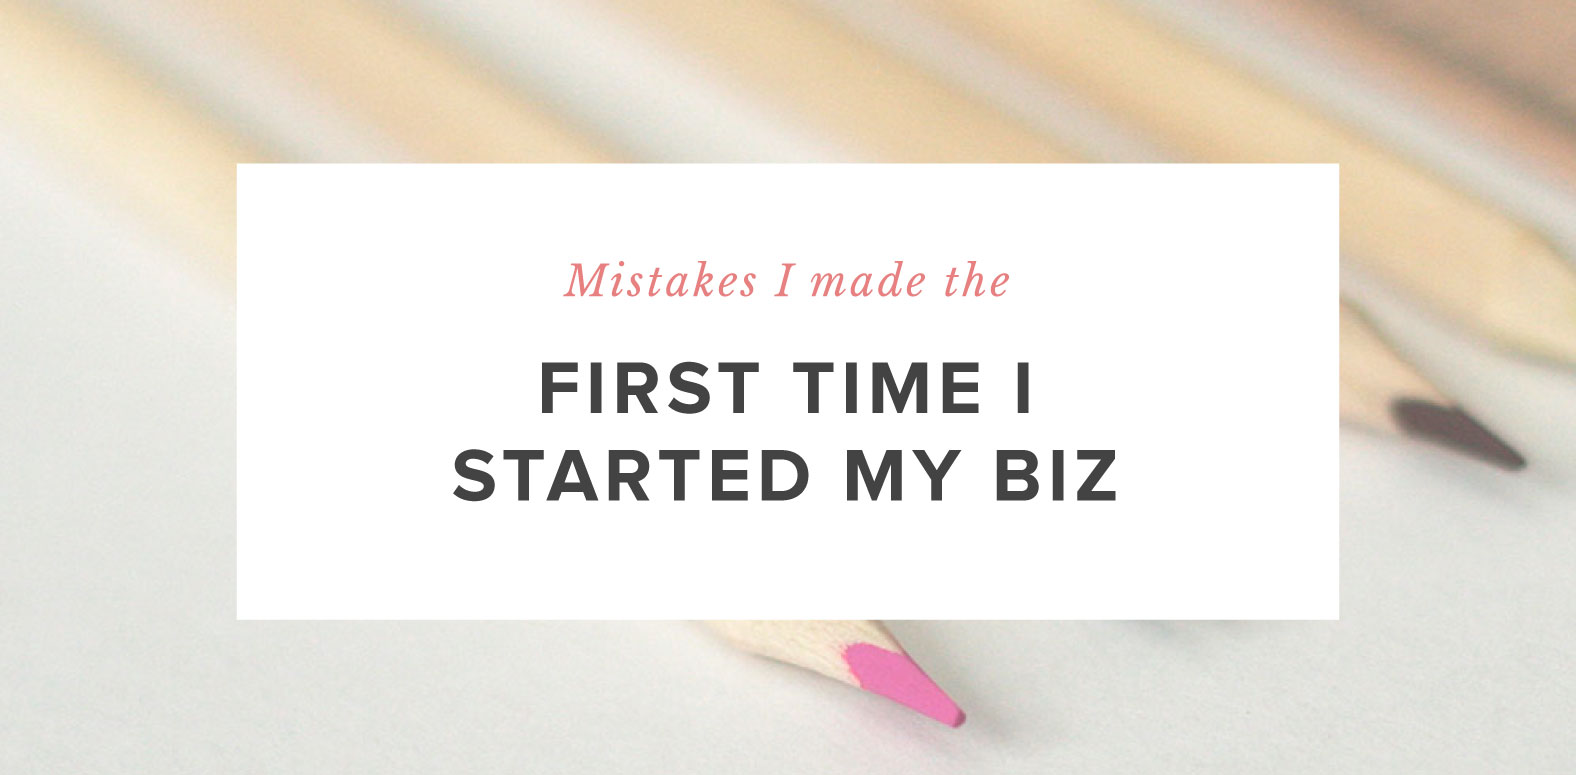 Mistakes I made the first time I started my business